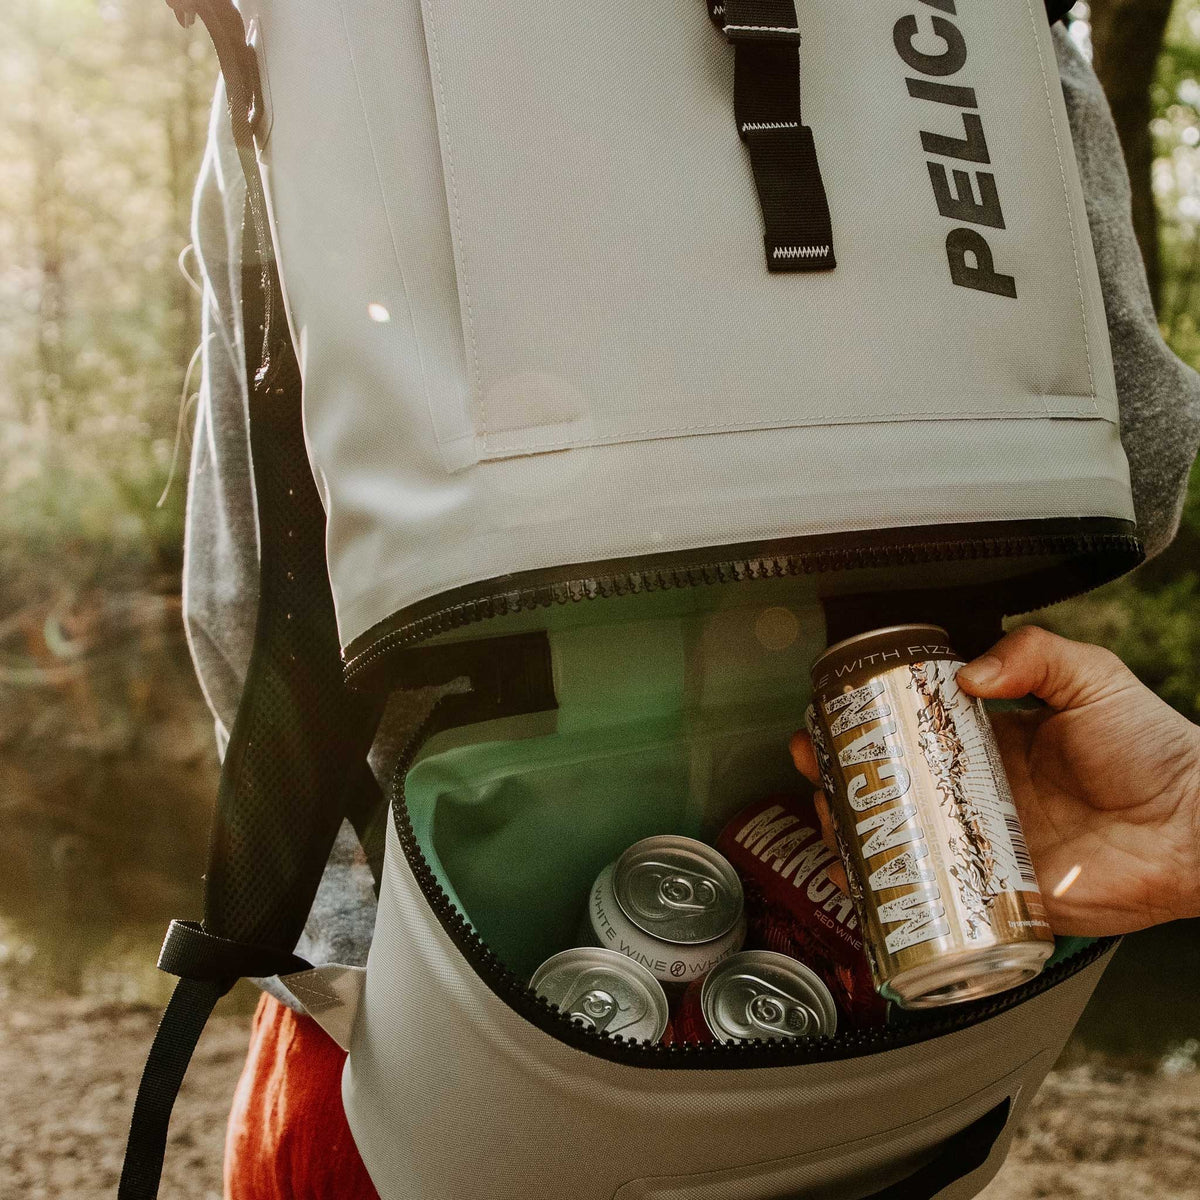 Light Grey Pelican™ Dayventure Backpack Soft Cooler canned beverages being pulled out of the cooler compartment